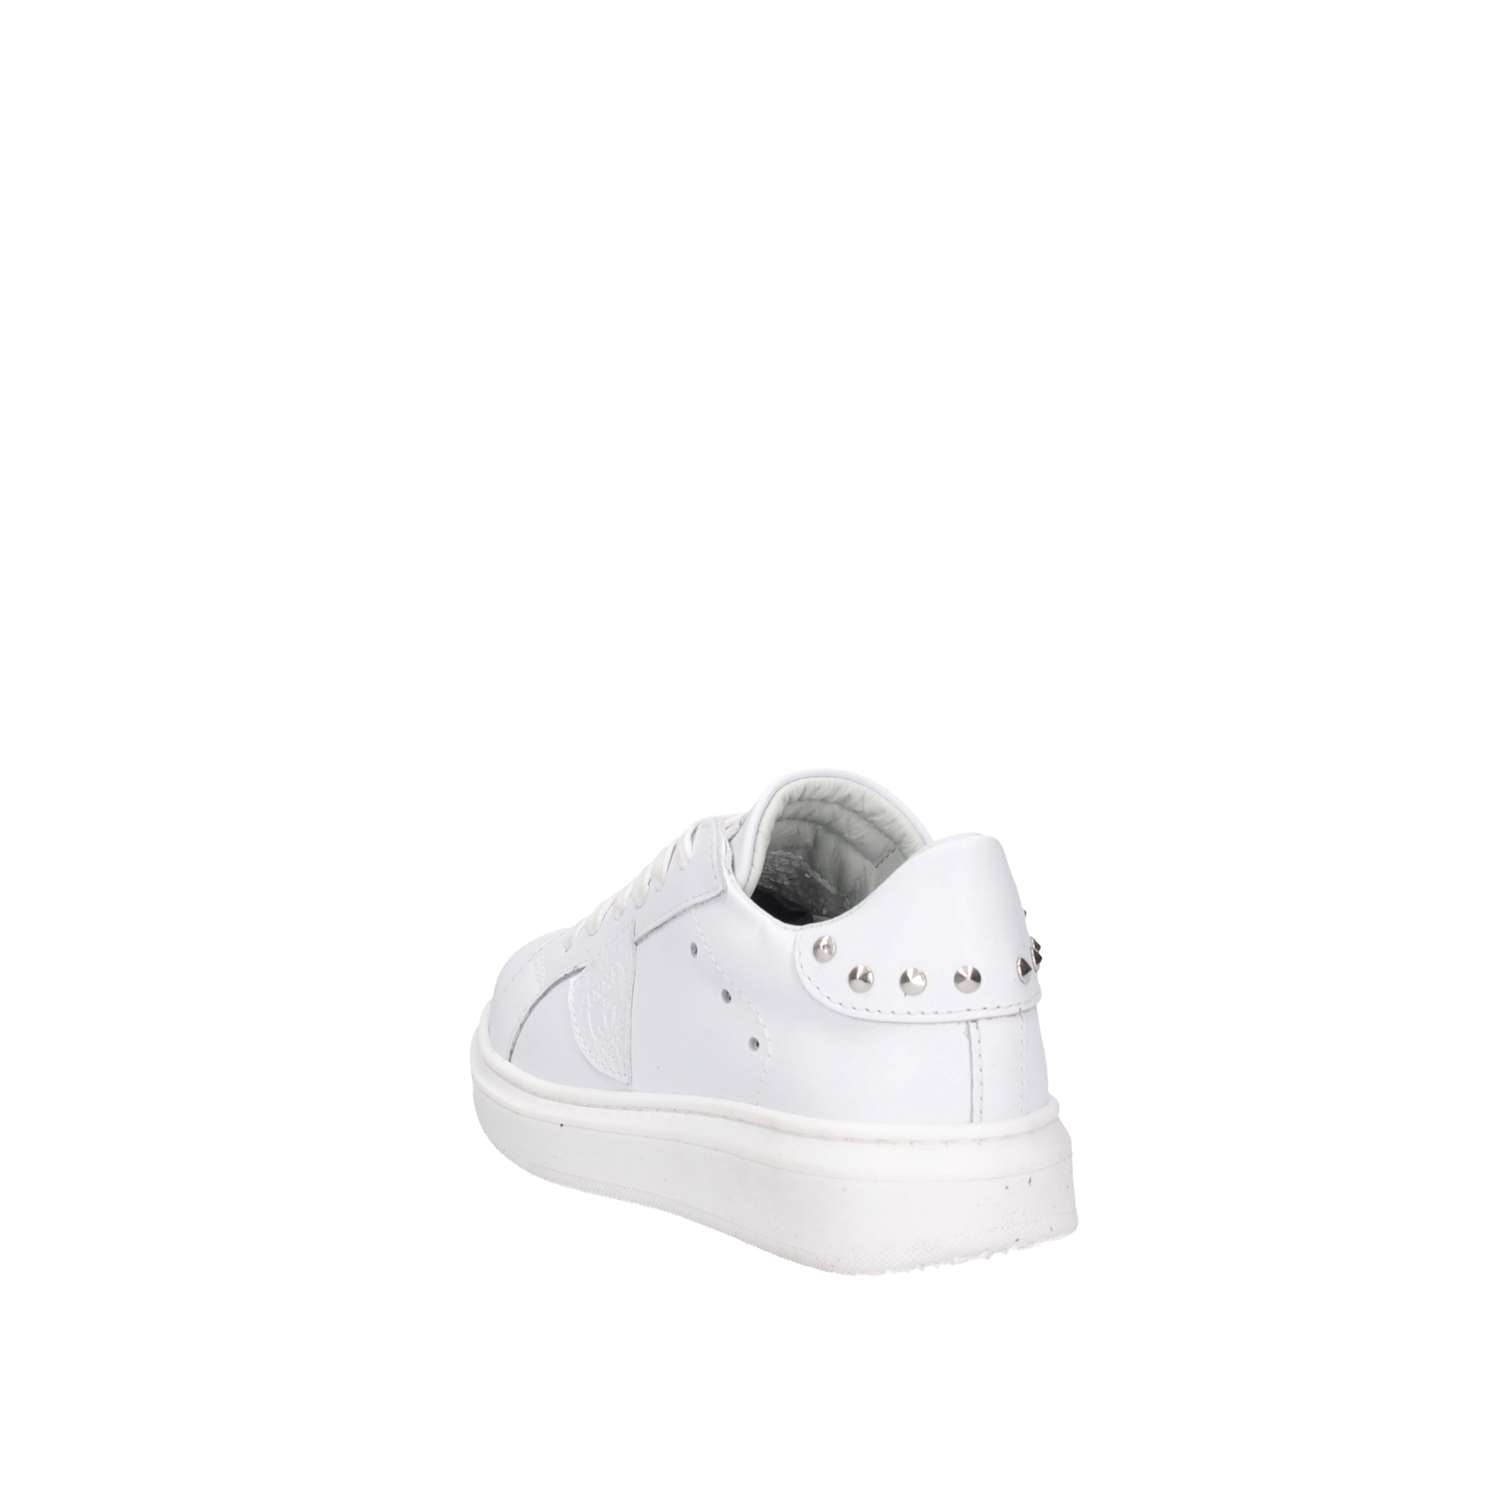 Philippe Model BAL0-SV3 A-B-C White Shoes Child 